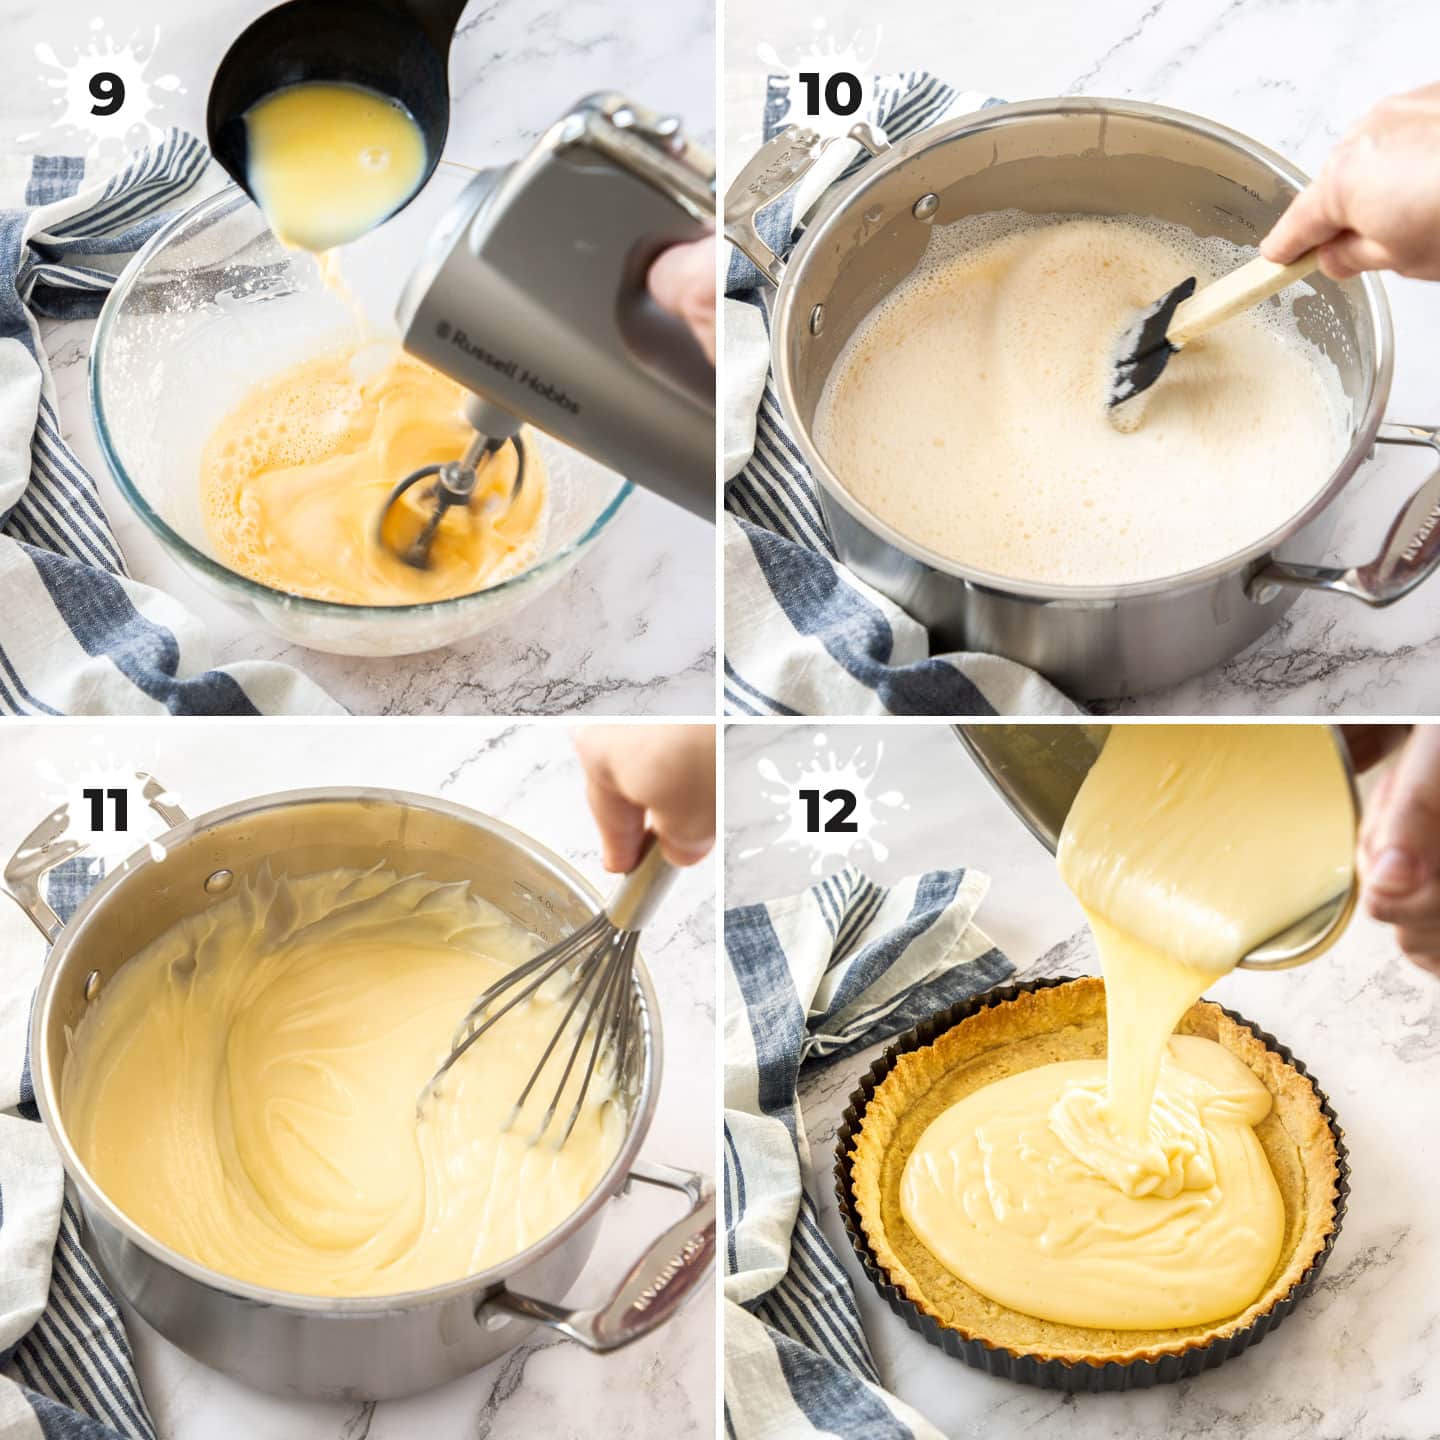 Mixing up creme patissiere in a saucepan, then pouring into a tart shell.